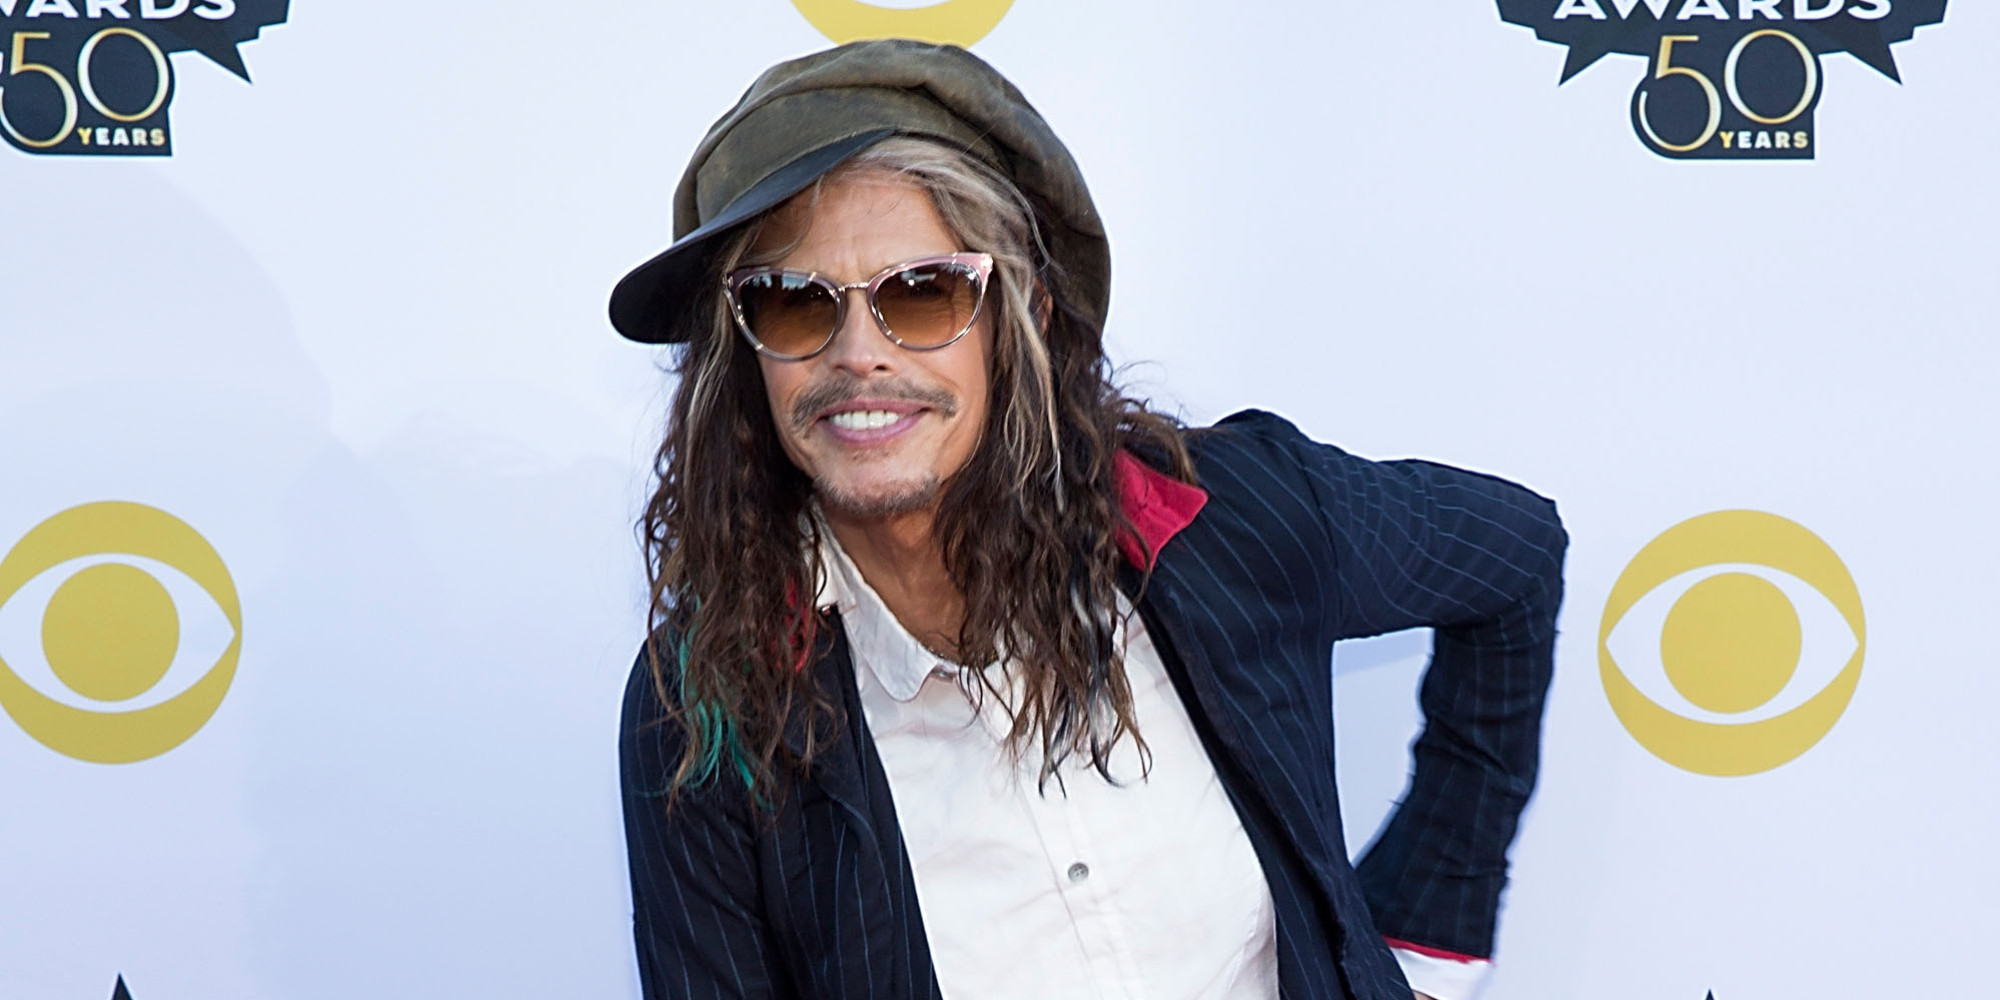 Steven Tyler Wallpaper High Resolution And Quality